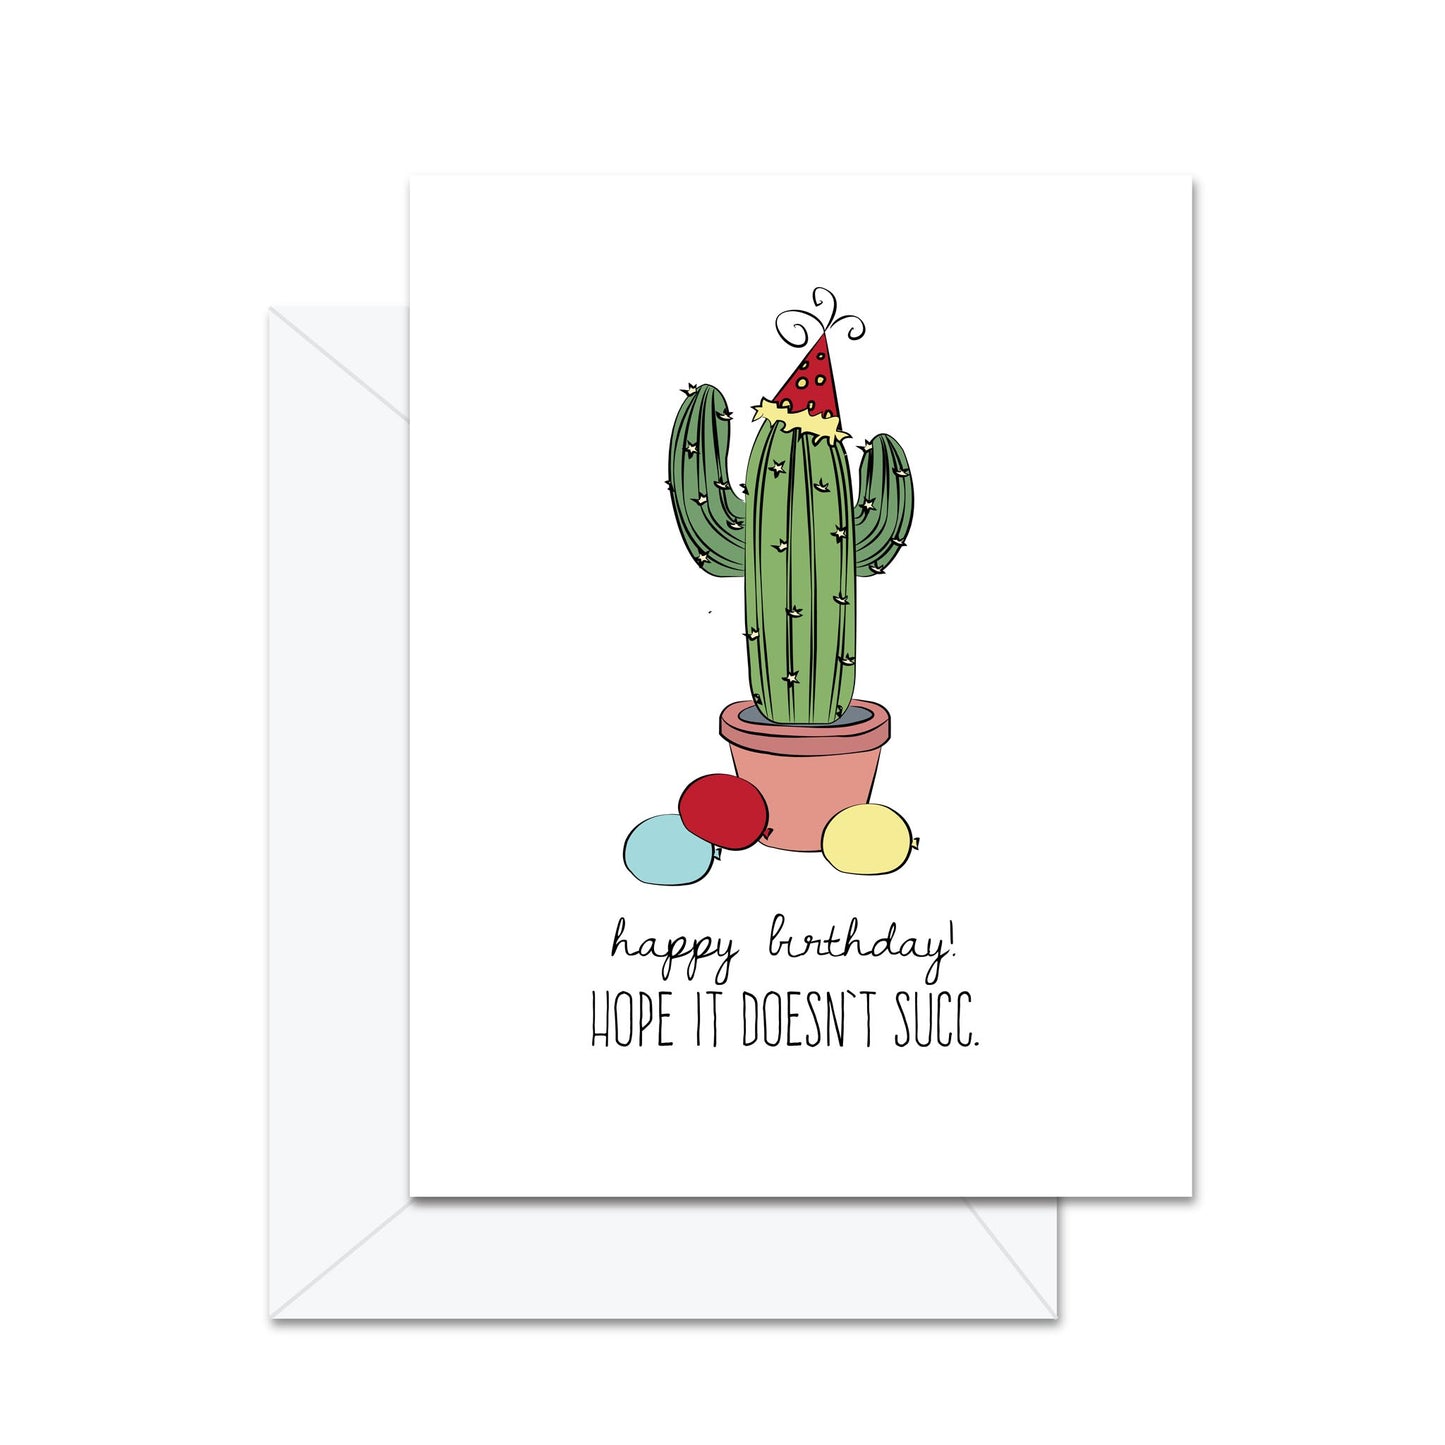 Happy Birthday! Hope It Doesn't Succ! - Greeting Card